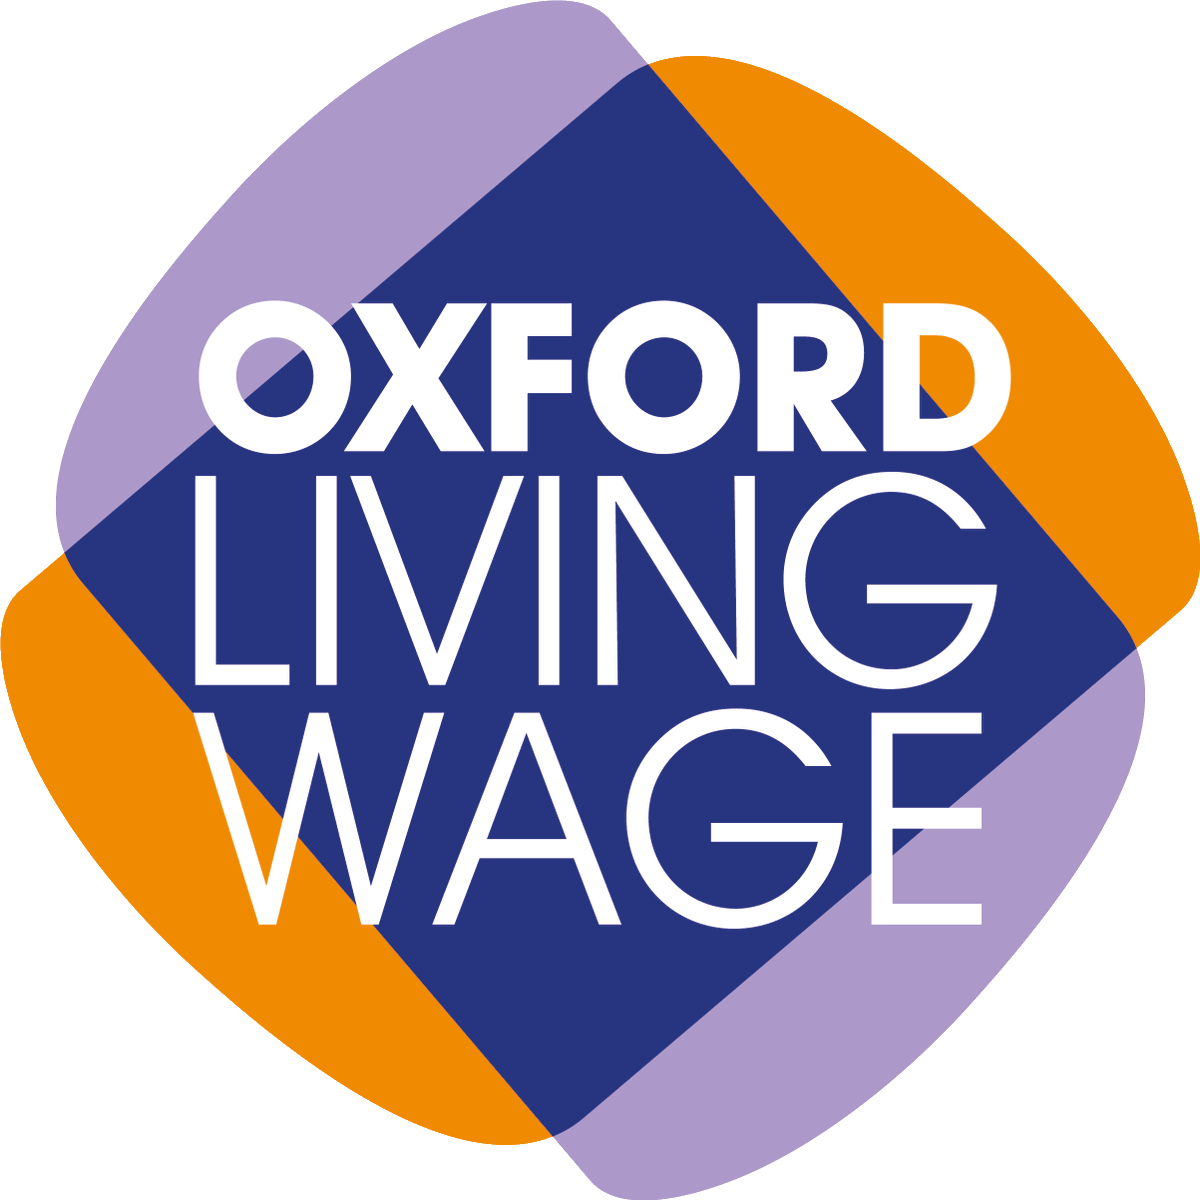 As has been showcased by many other fantastic #Oxfordshire businesses today, we are also proud to say that we are an #OxfordLivingWage organisation. We are therefore delighted to champion #OxfordLivingWageWed! Find out more: oxford.gov.uk/info/20005/bus…